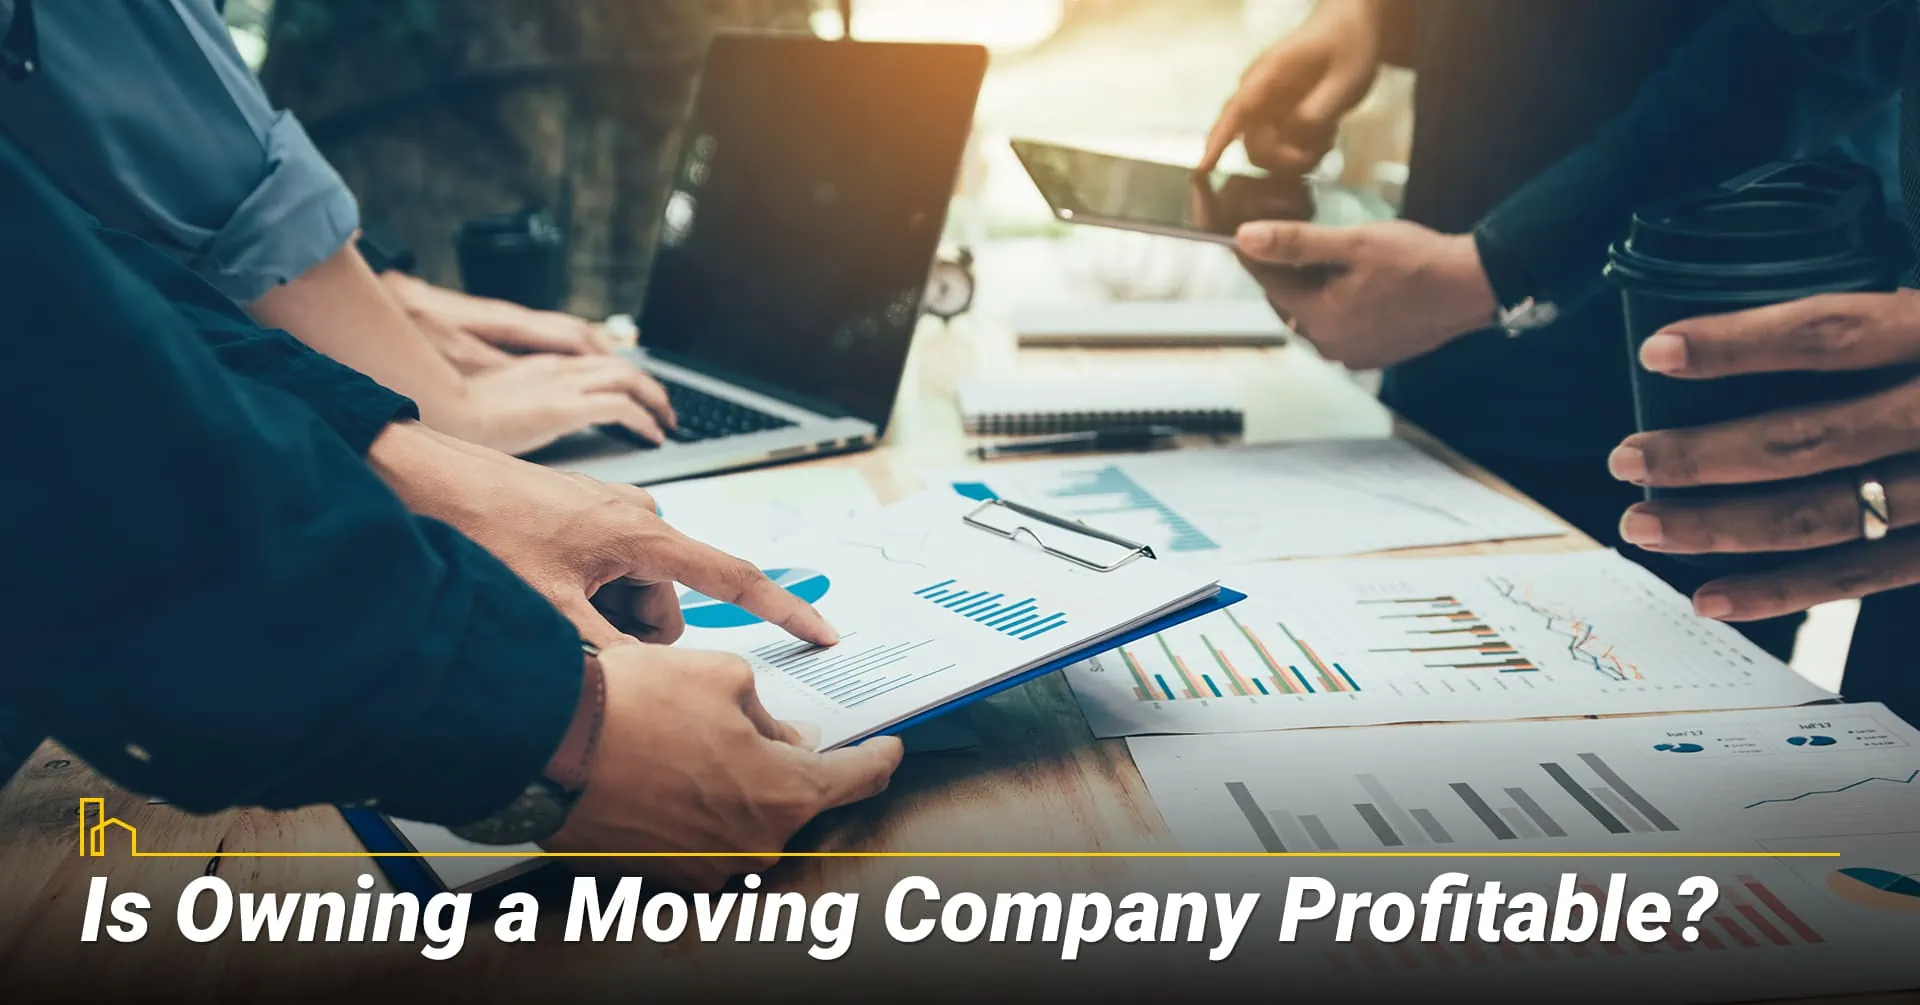 Is Owning a Moving Company Profitable?